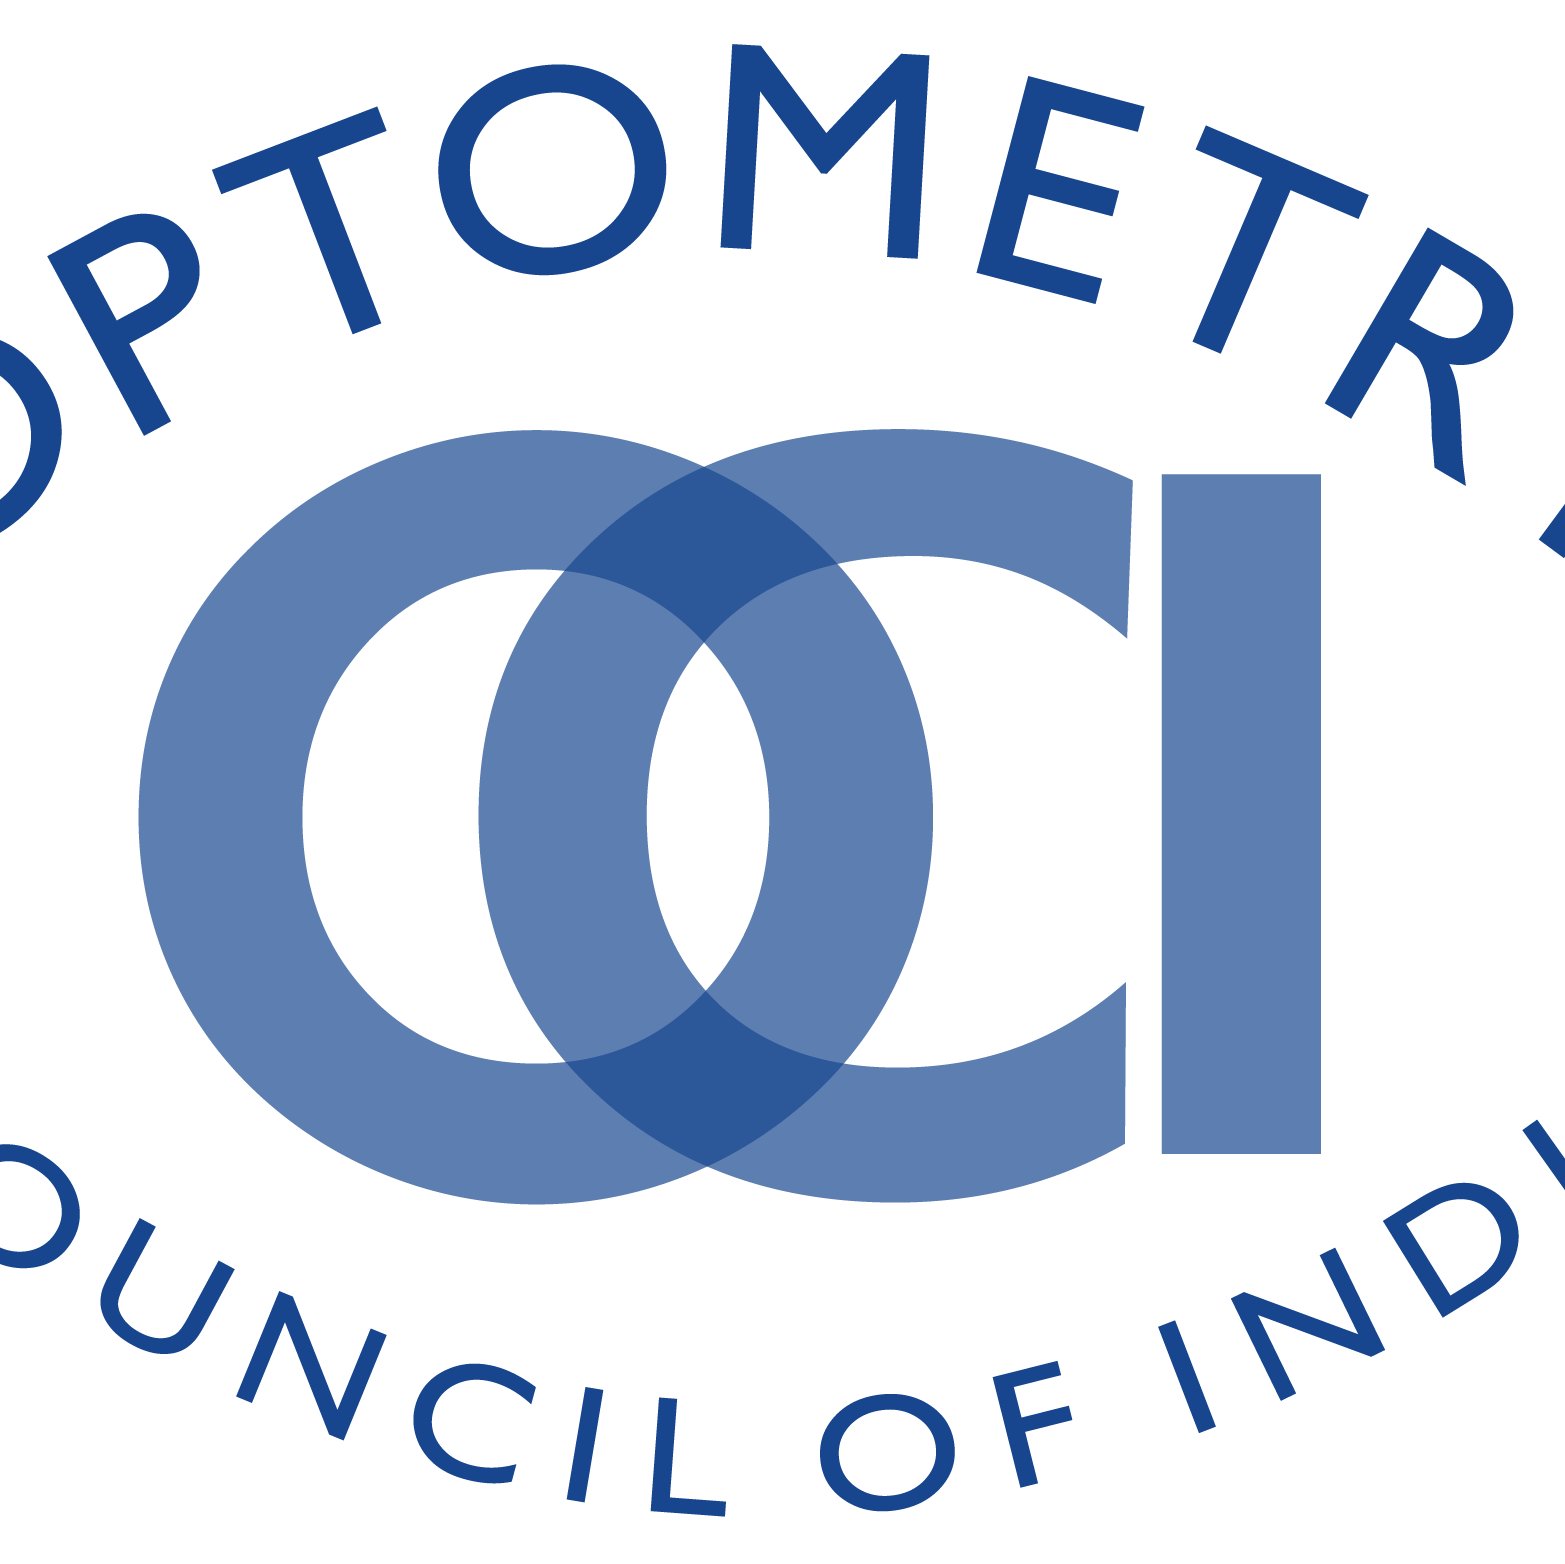 Optometry Council of India (OCI) is a self - regulatory body that has been established in September 2012 under the Company Act.